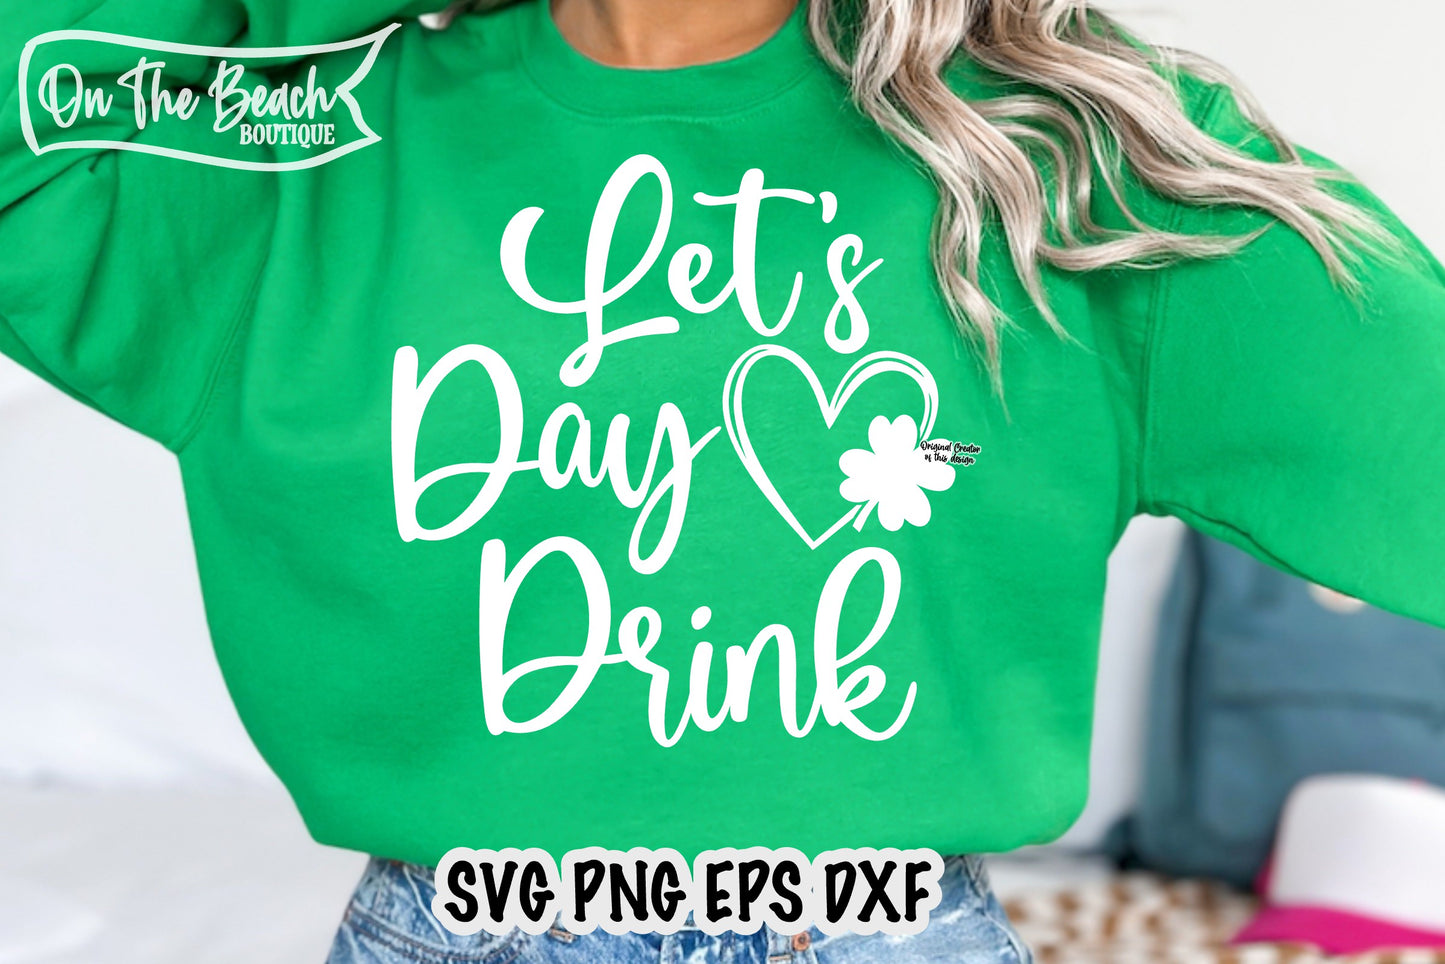 Let's Day Drink SVG PNG EPS DXF St. Patrick's Day Lucky Clover Heart